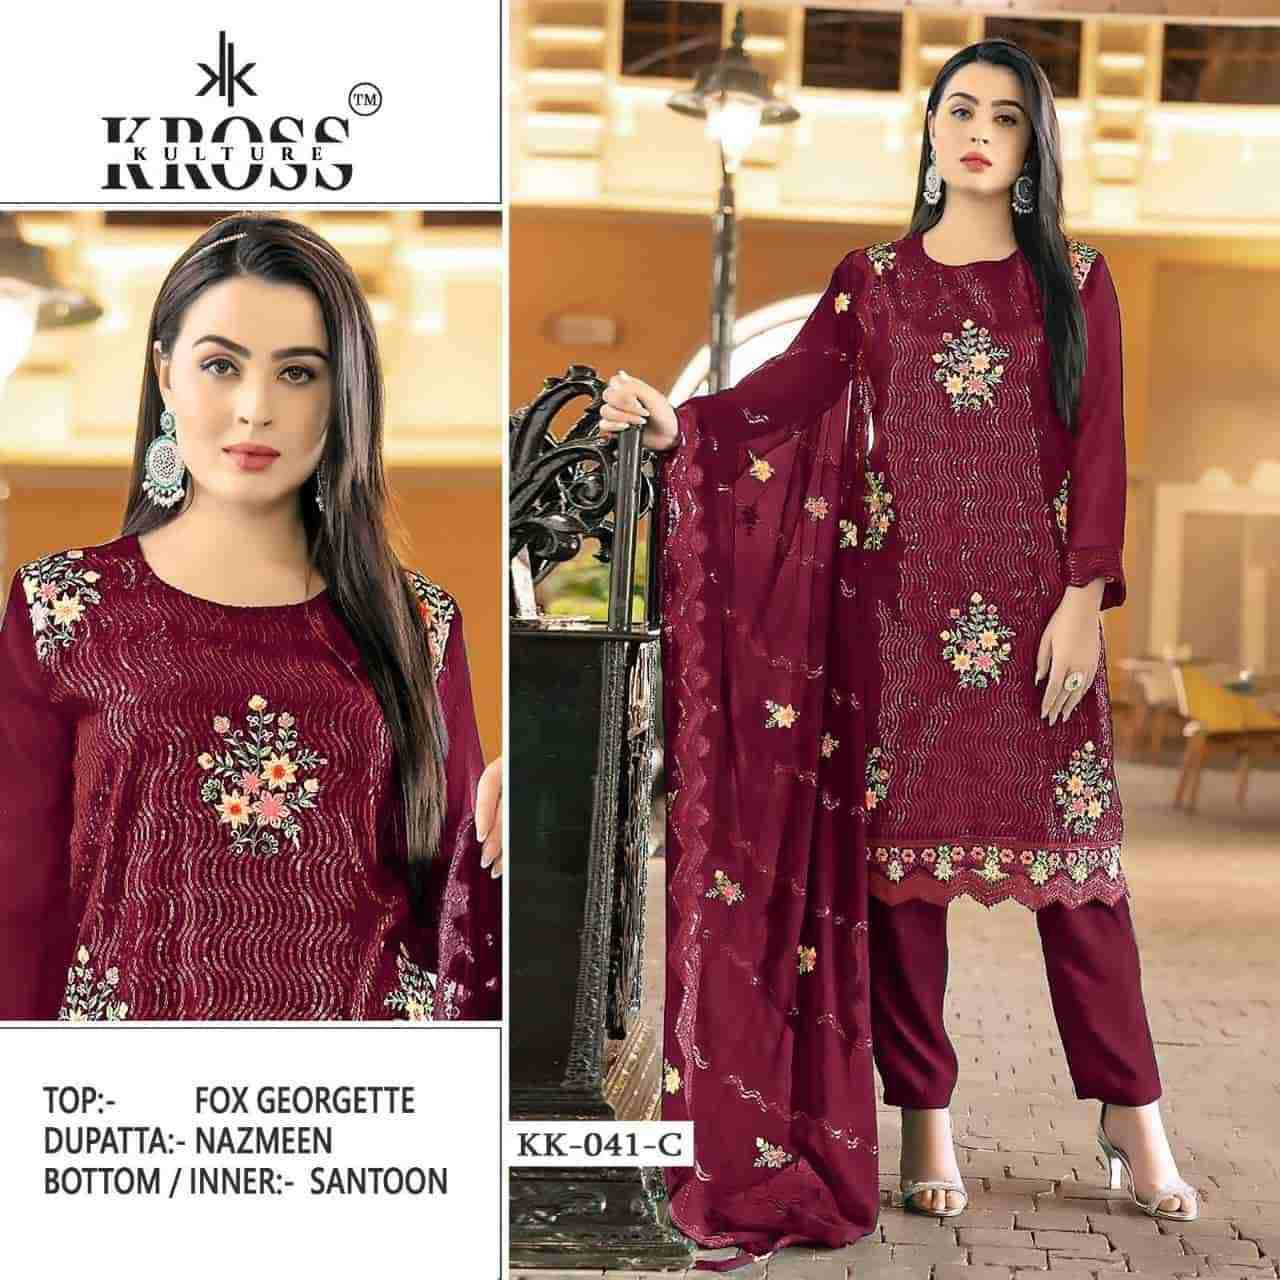 Kross Kulture Hit Design 041 Colours By Kross Kulture Beautiful Stylish Pakistani Suits Fancy Colorful Casual Wear & Ethnic Wear & Ready To Wear Heavy Georgette Embroidered Dresses At Wholesale Price